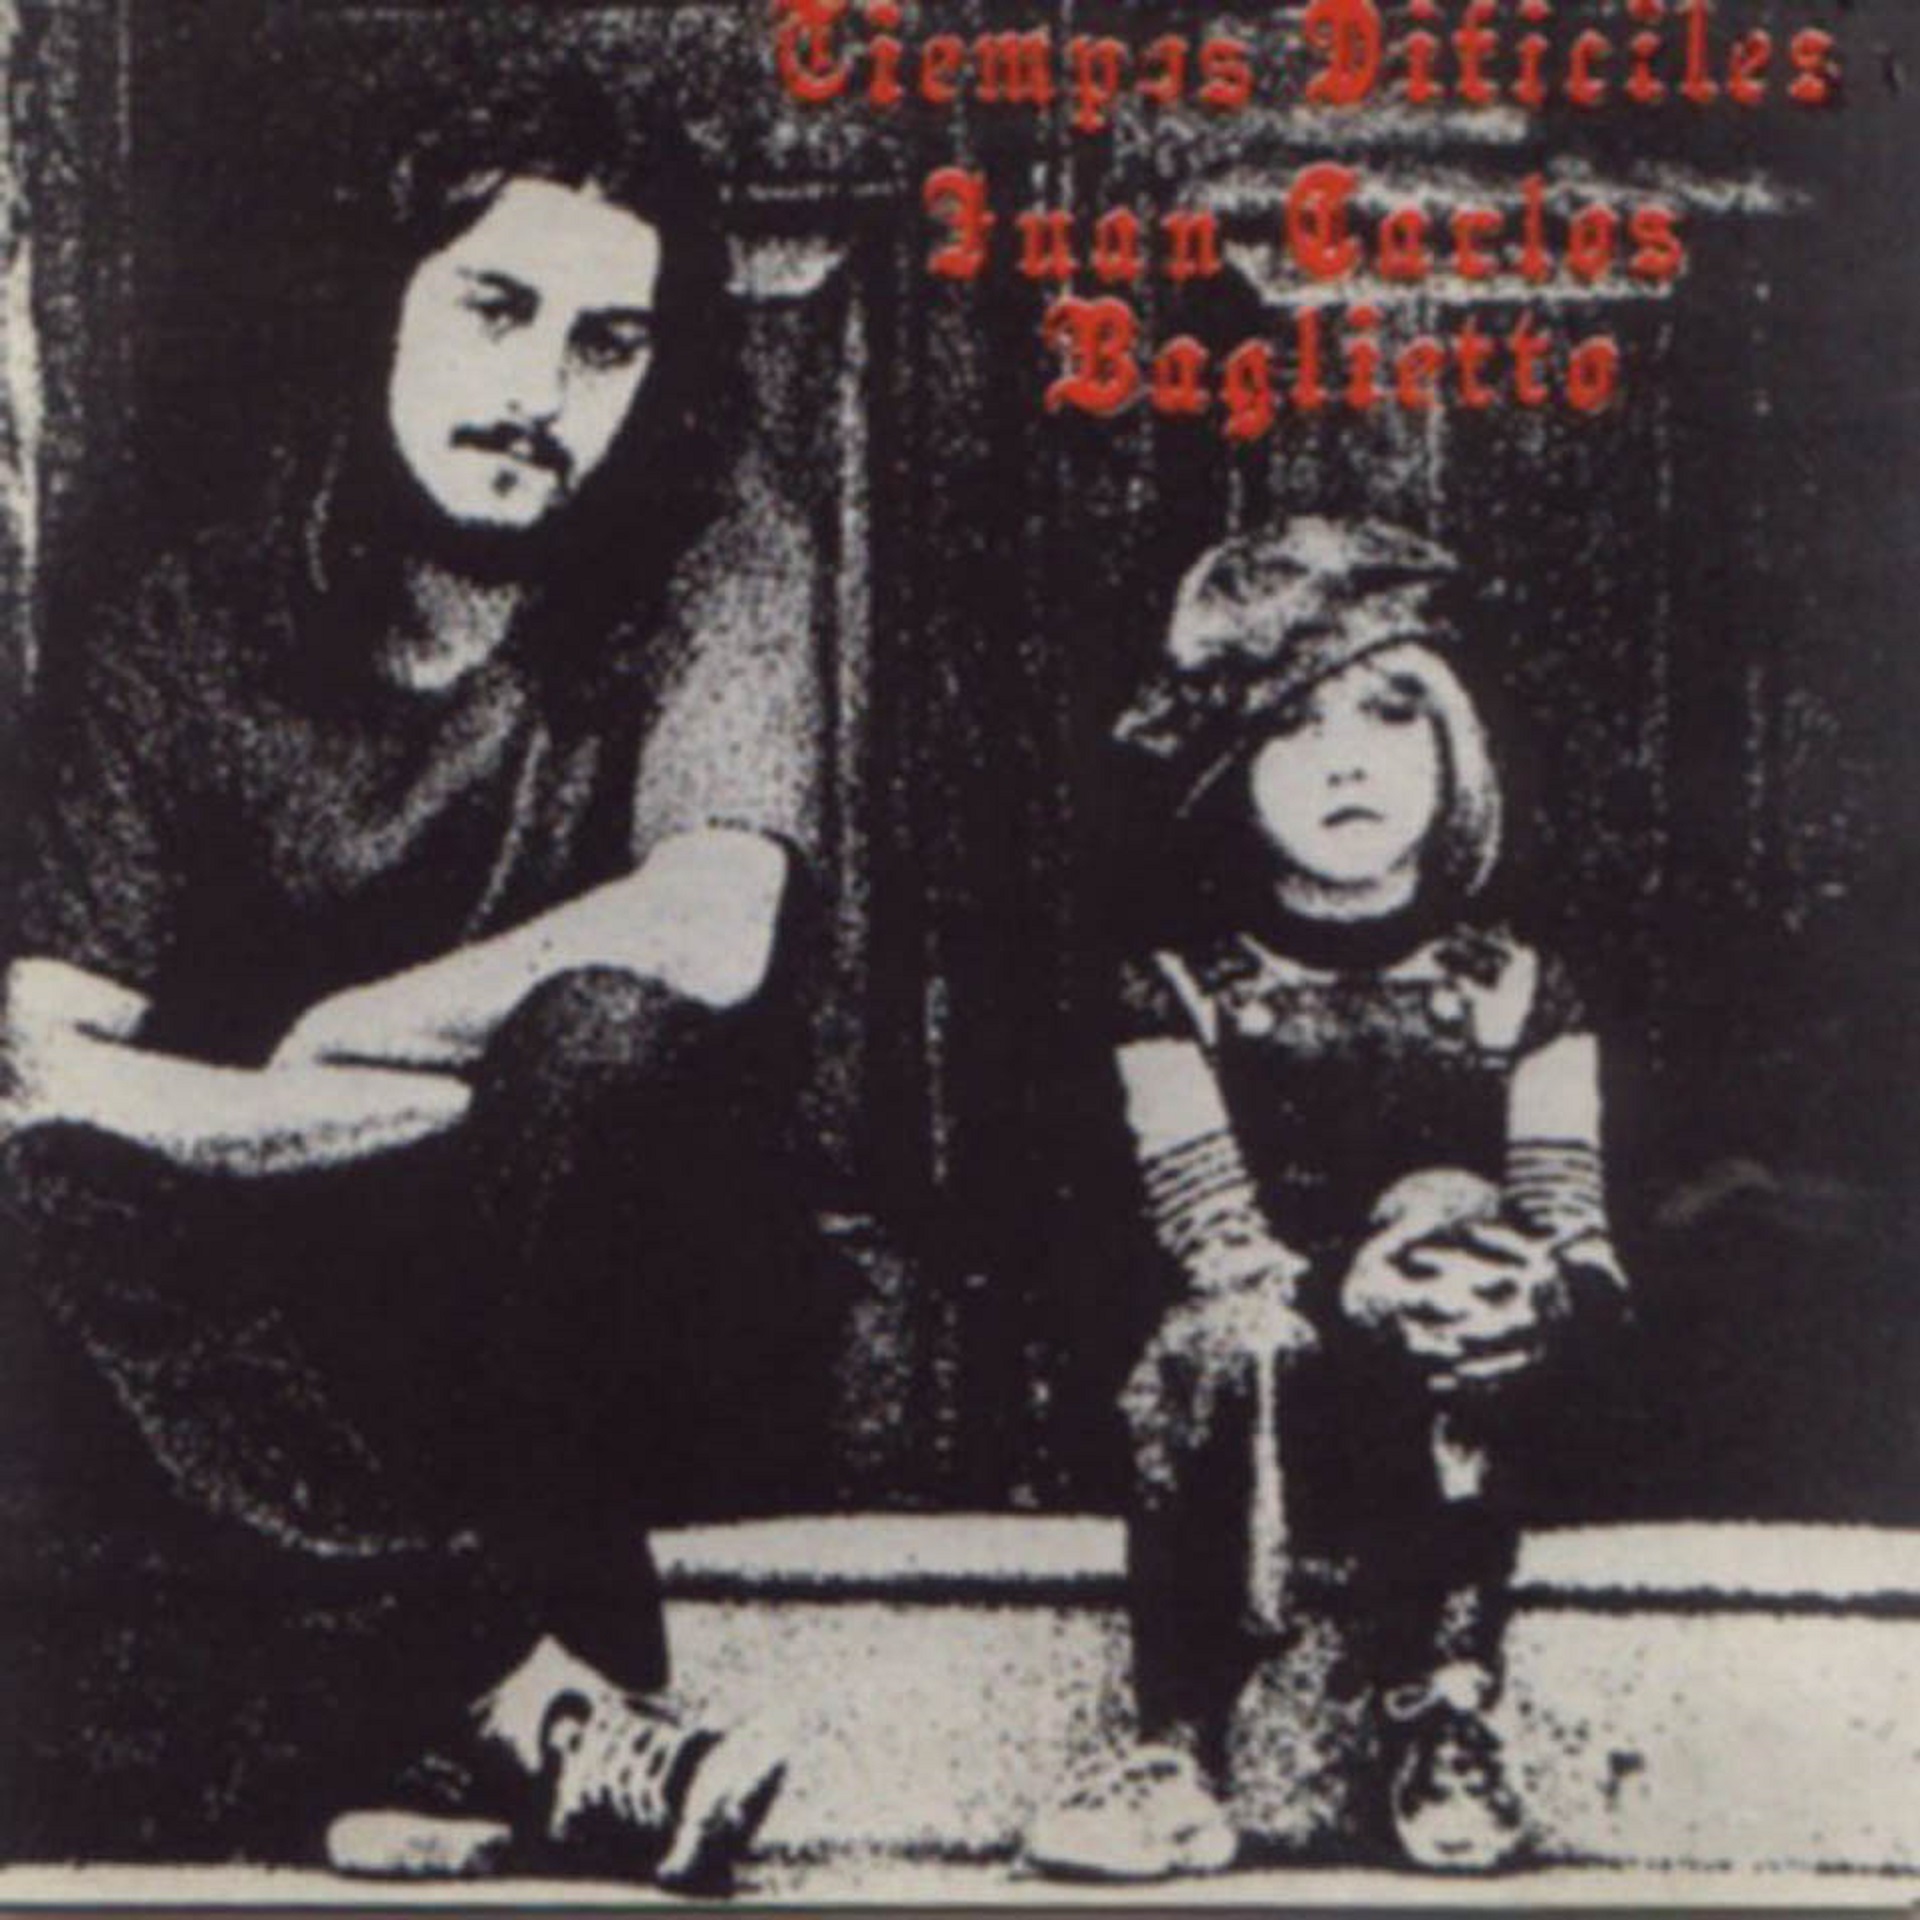 "hard times" (1992) is the first album by Juan Carlos Baglietto